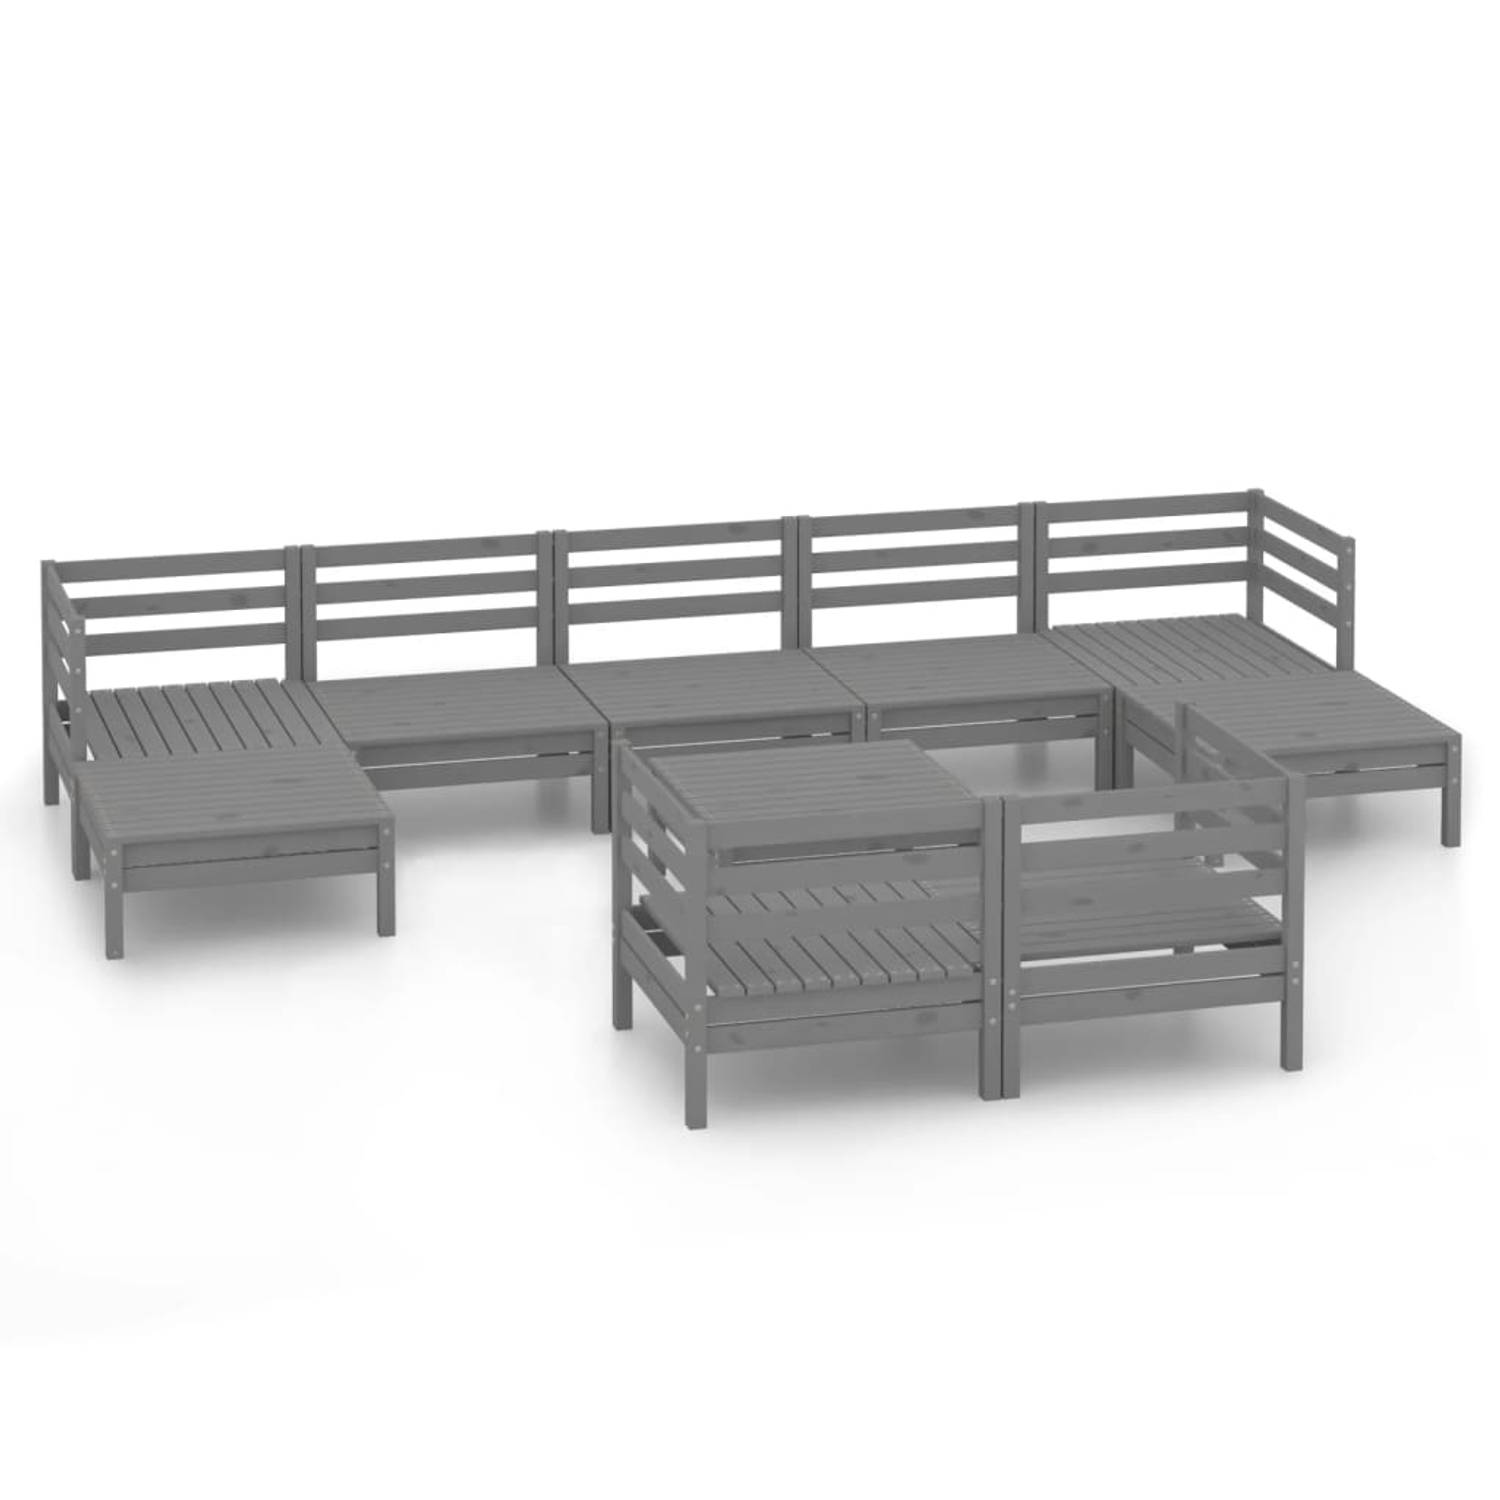 The Living Store 10-delige Loungeset massief grenenhout grijs - Tuinset